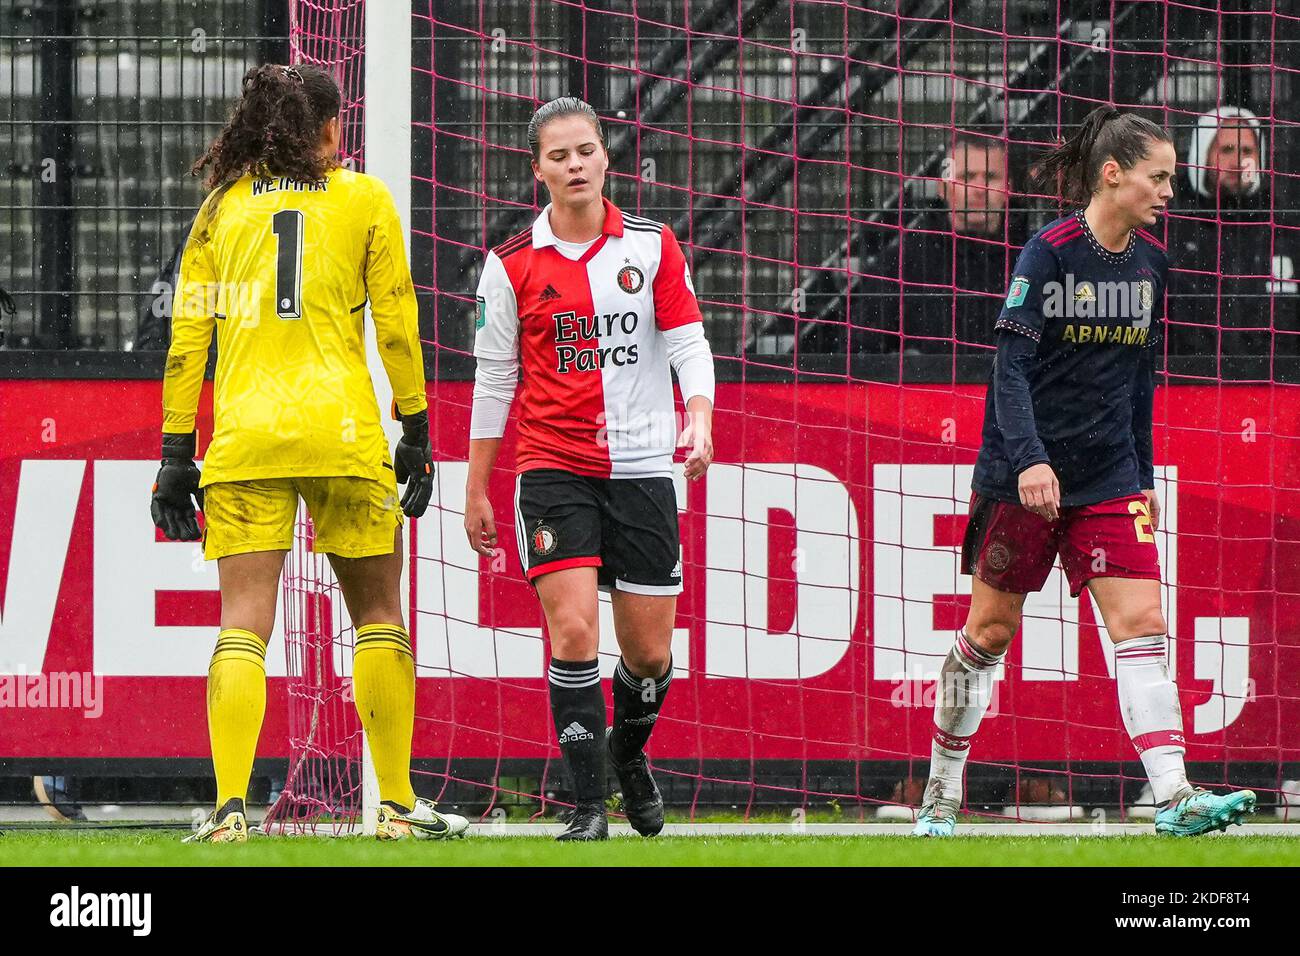 Rotterdam - Sophie Cobussen of Feyenoord V1 reacts to her own goal 0-4 during the match between Feyenoord V1 v Ajax V1 at Nieuw Varkenoord on 6 November 2022 in Rotterdam, Netherlands. (Box to Box Pictures/Tom Bode) Stock Photo